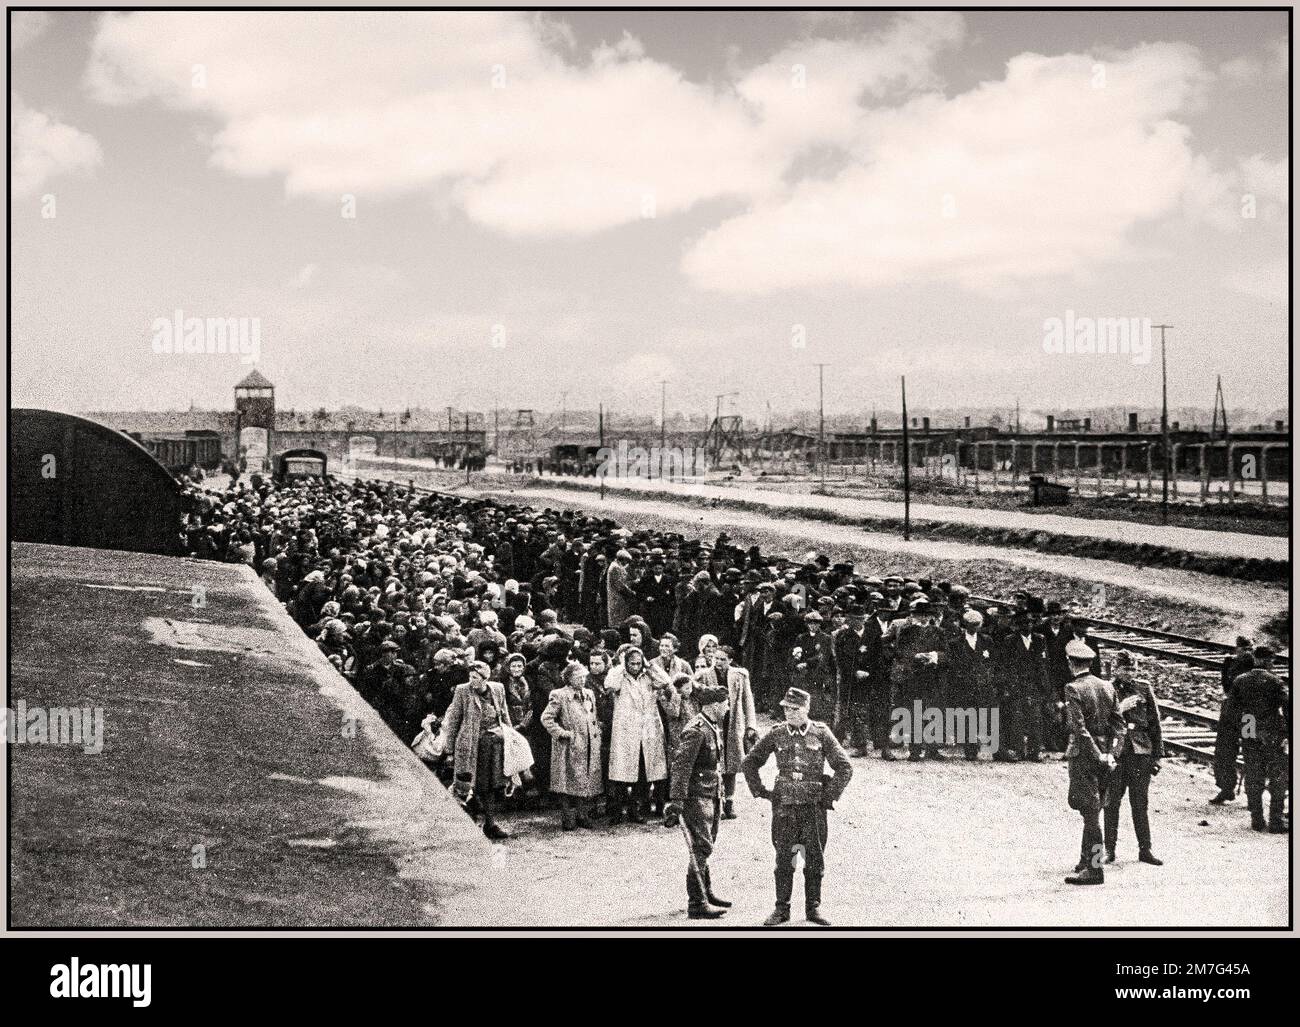 AUSCHWITZ-BIRKENAU HOLOCAUST PRISONERS ARRIVAL- A vision of a hell on earth. 1944, Nazis 'grading' (life or death) unsuspecting prisoners on rail concourse outside entrance to Auschwitz-Birkenau extermination death camp. The infamous Auschwitz camp was started by order of Adolf Hitler in 1940's during the occupation of Poland by Nazi Germany during World War 2, further enabled by Heinrich Luitpold Himmler the Reichsführer of the Schutzstaffel, and leading member of the Nazi Party of Germany Stock Photo